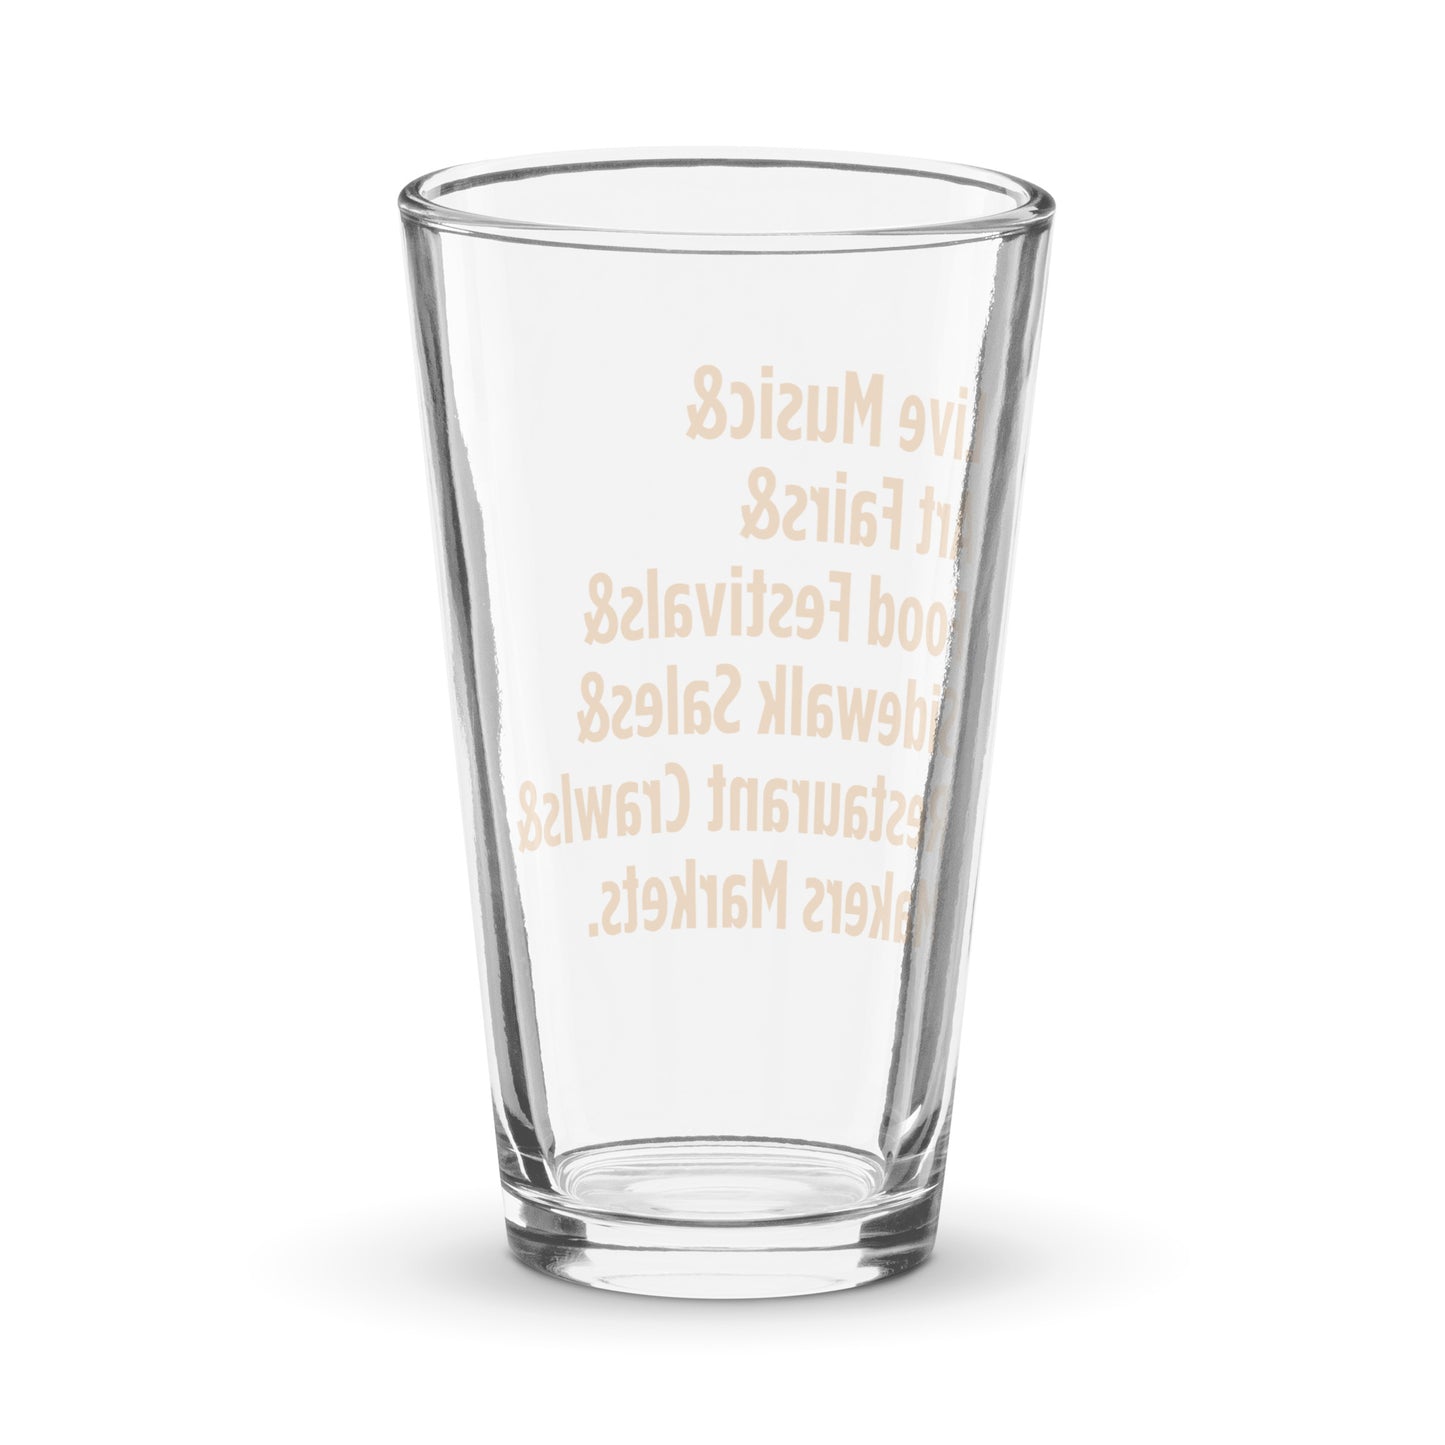 "Only on Main Street" (Events) Shaker Pint Glass